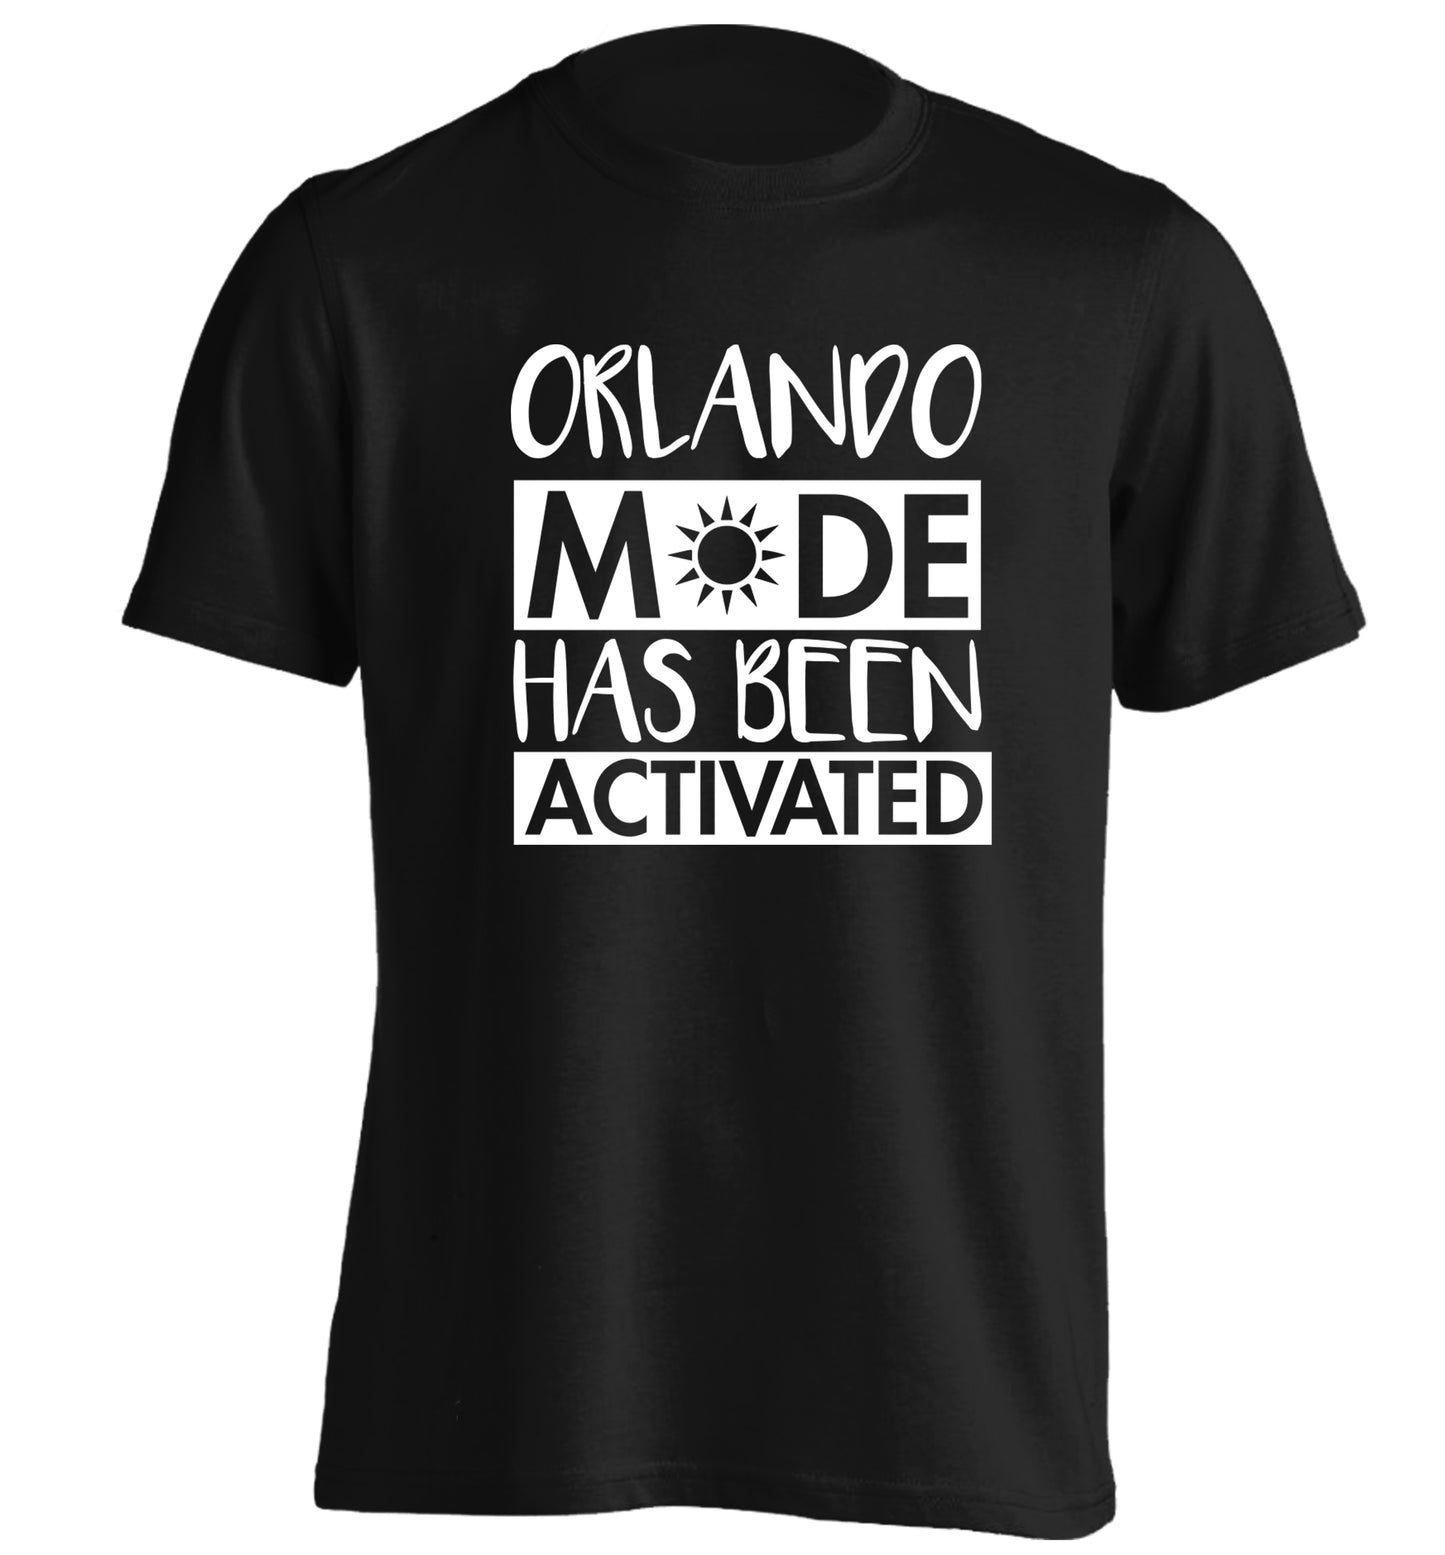 Orlando mode has been activated adults unisex black Tshirt 2XL